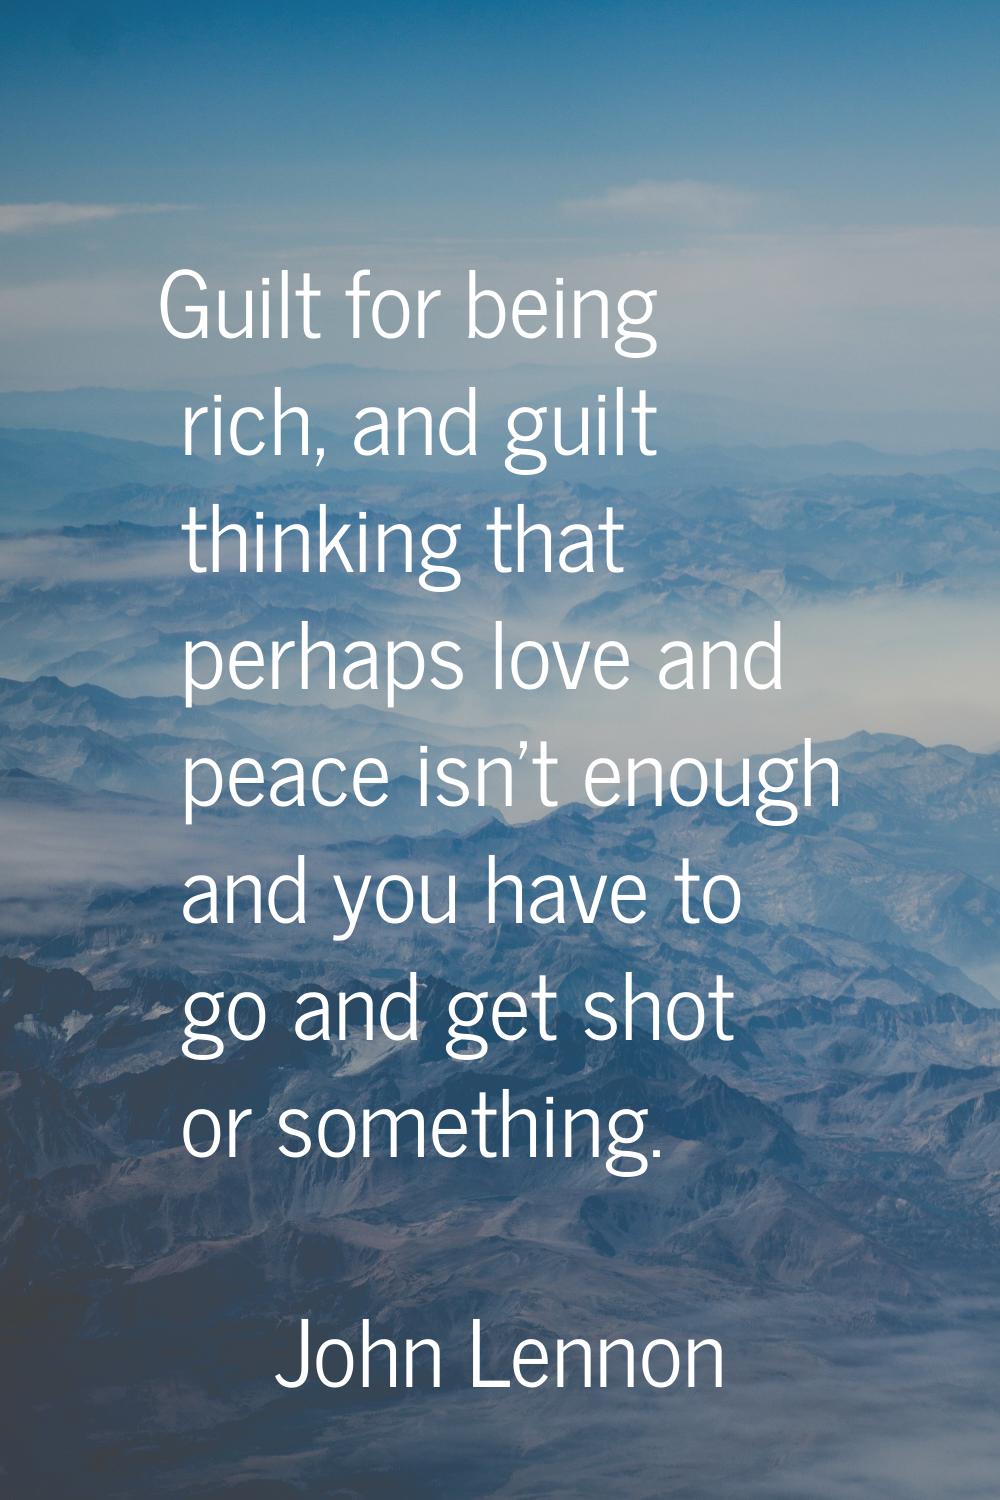 Guilt for being rich, and guilt thinking that perhaps love and peace isn't enough and you have to g